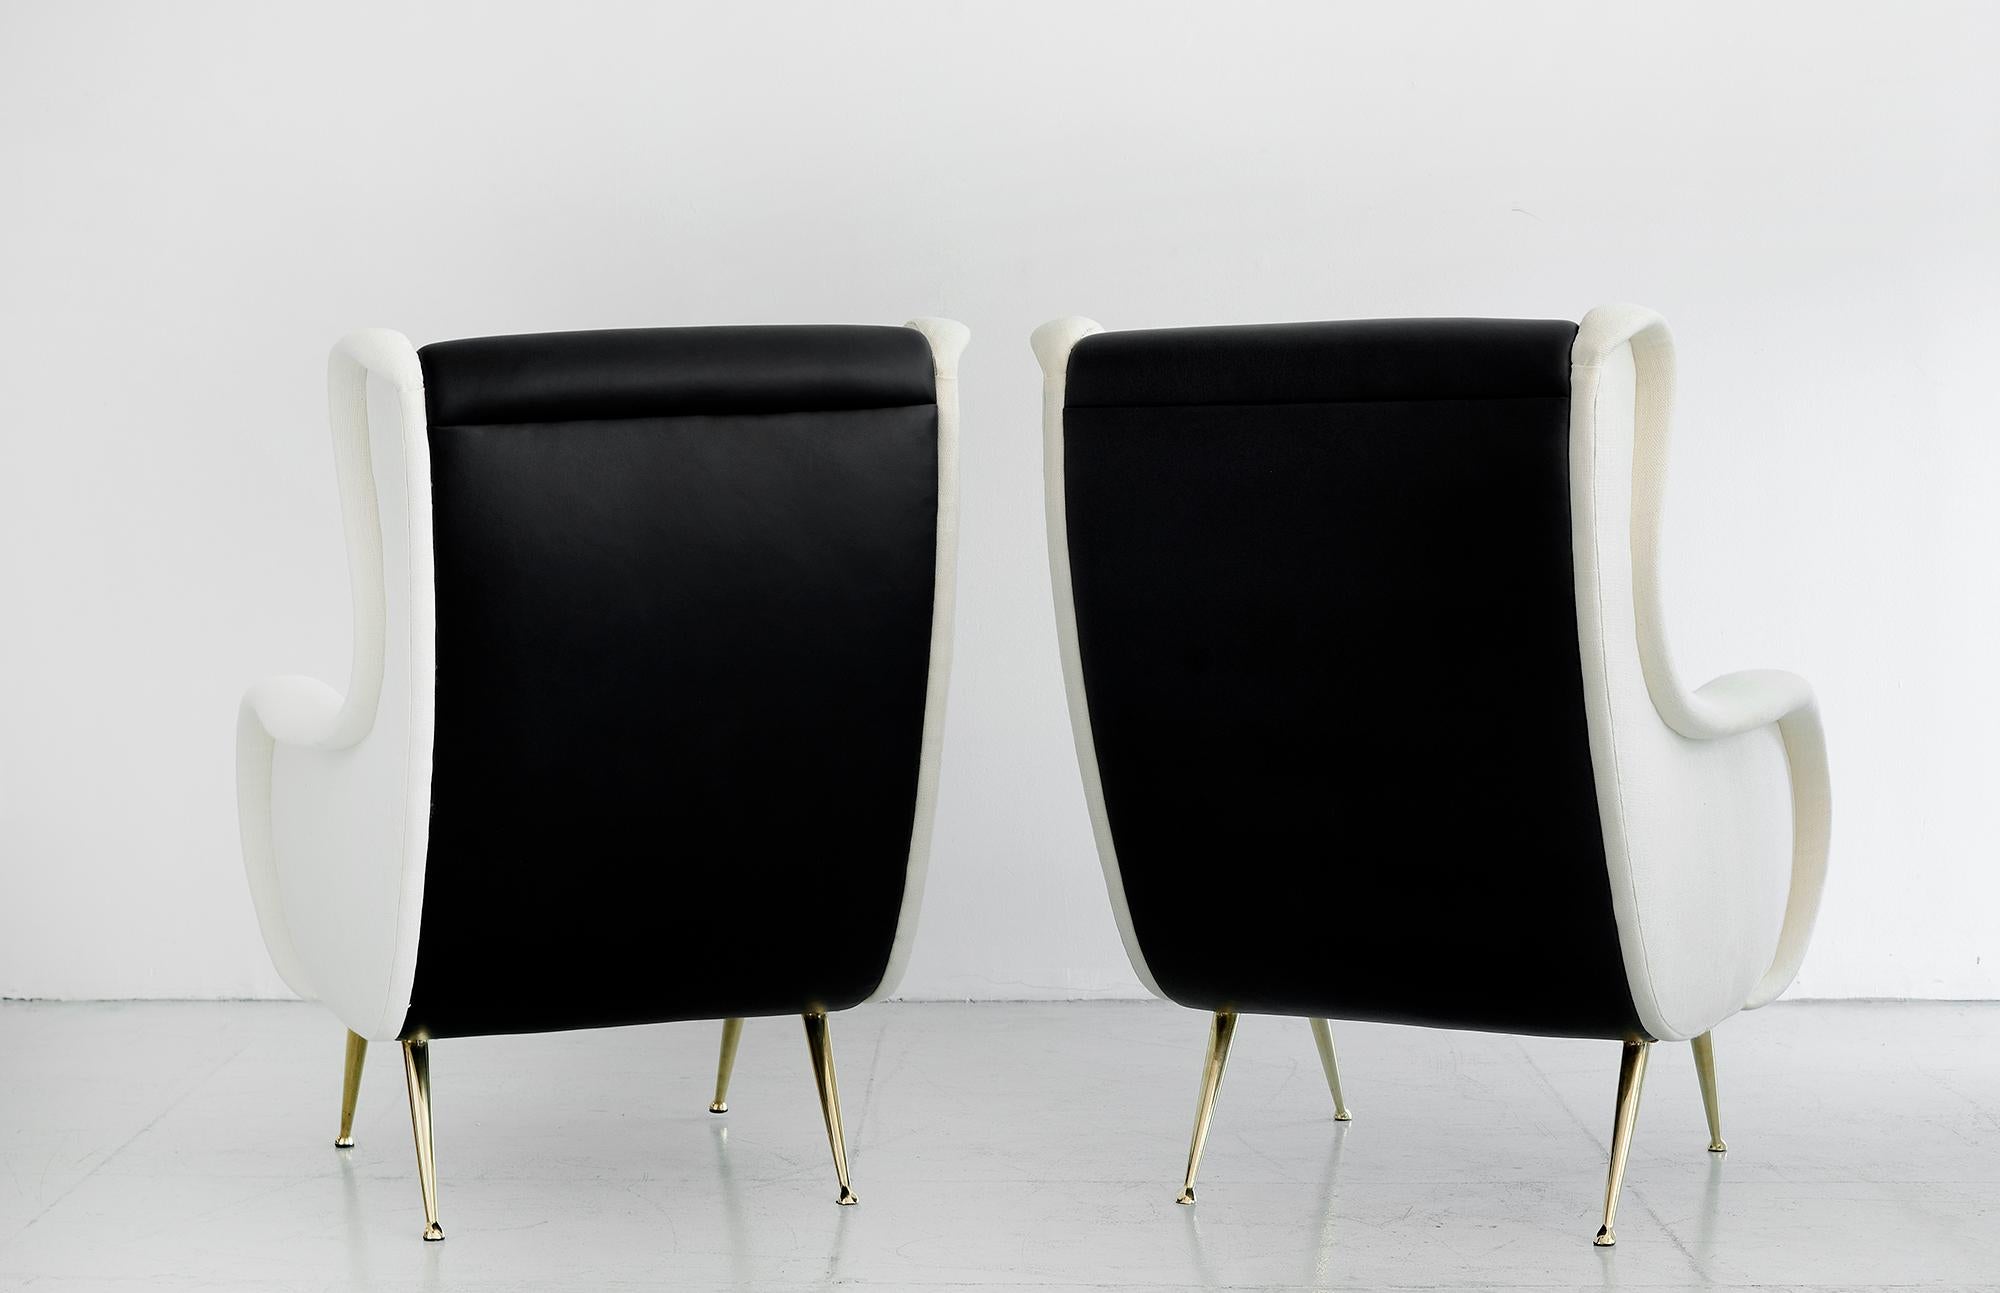 Handsome Marco Zanuso attributed club chair with signature curved lines, brass legs and reupholstered in black seat and backs with contrasting white linen arms.